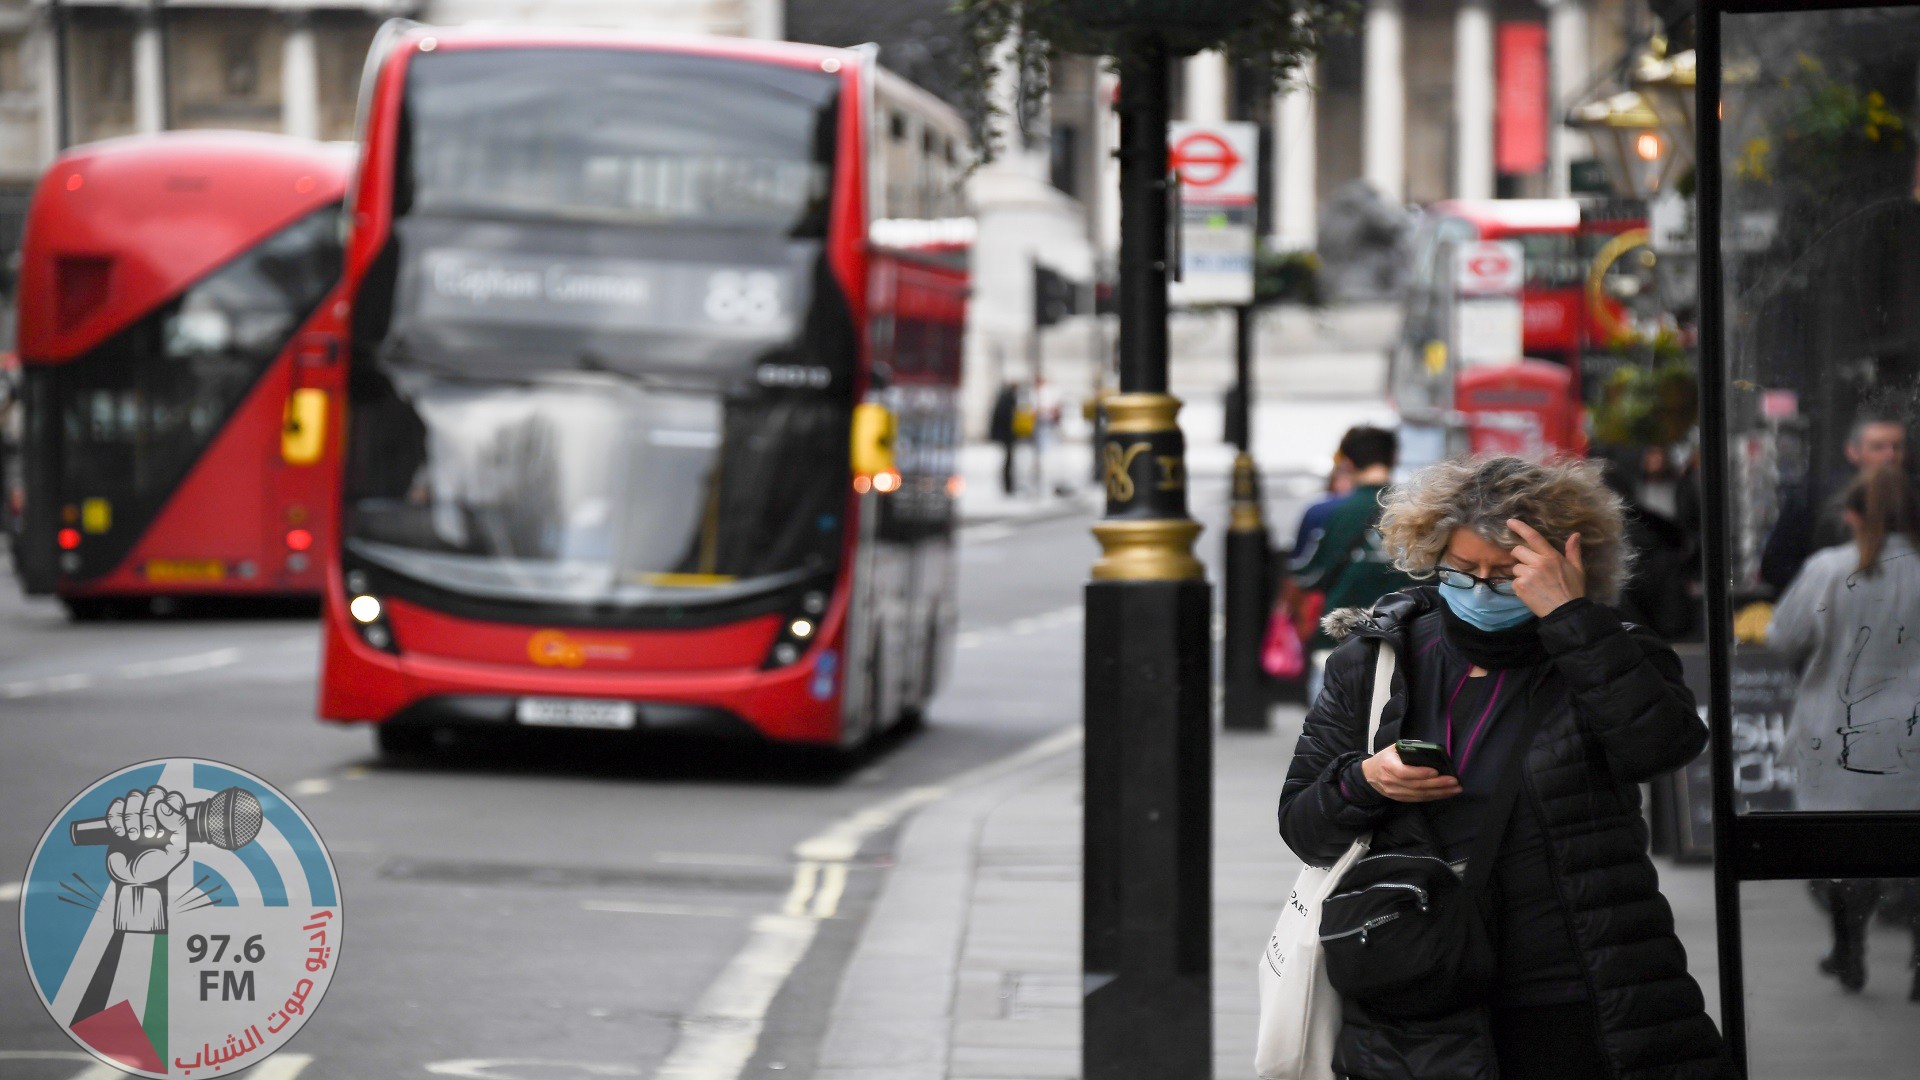 A woman wears a mask as a bus passes on March 17, 2020 in London, England. Boris Johnson held the first of his public daily briefings on the Coronavirus outbreak yesterday and told the public to avoid theatres and pubs and to work from home where possible. The number of people infected with COVID-19 in the UK has passed 1500 with 55 deaths. (Photo by Alberto Pezzali/NurPhoto via Getty Images)